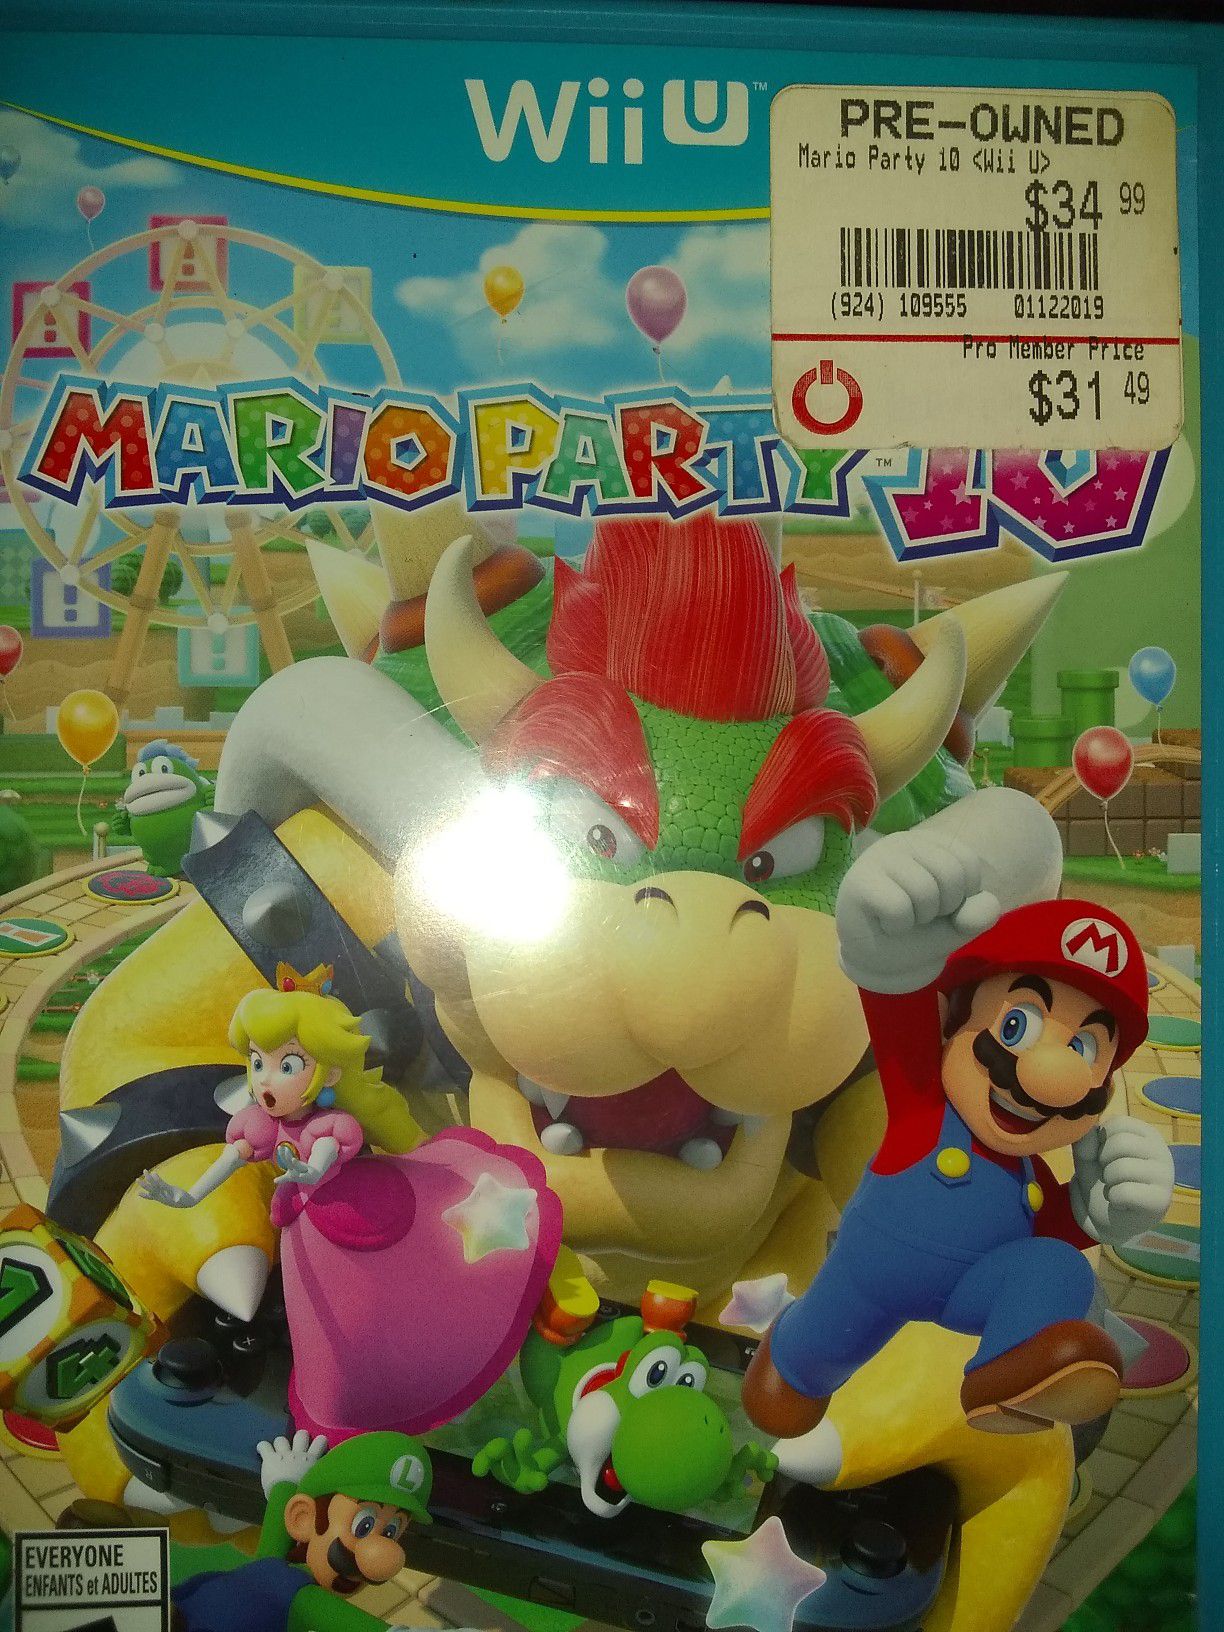 Mario party 10 for Wii U